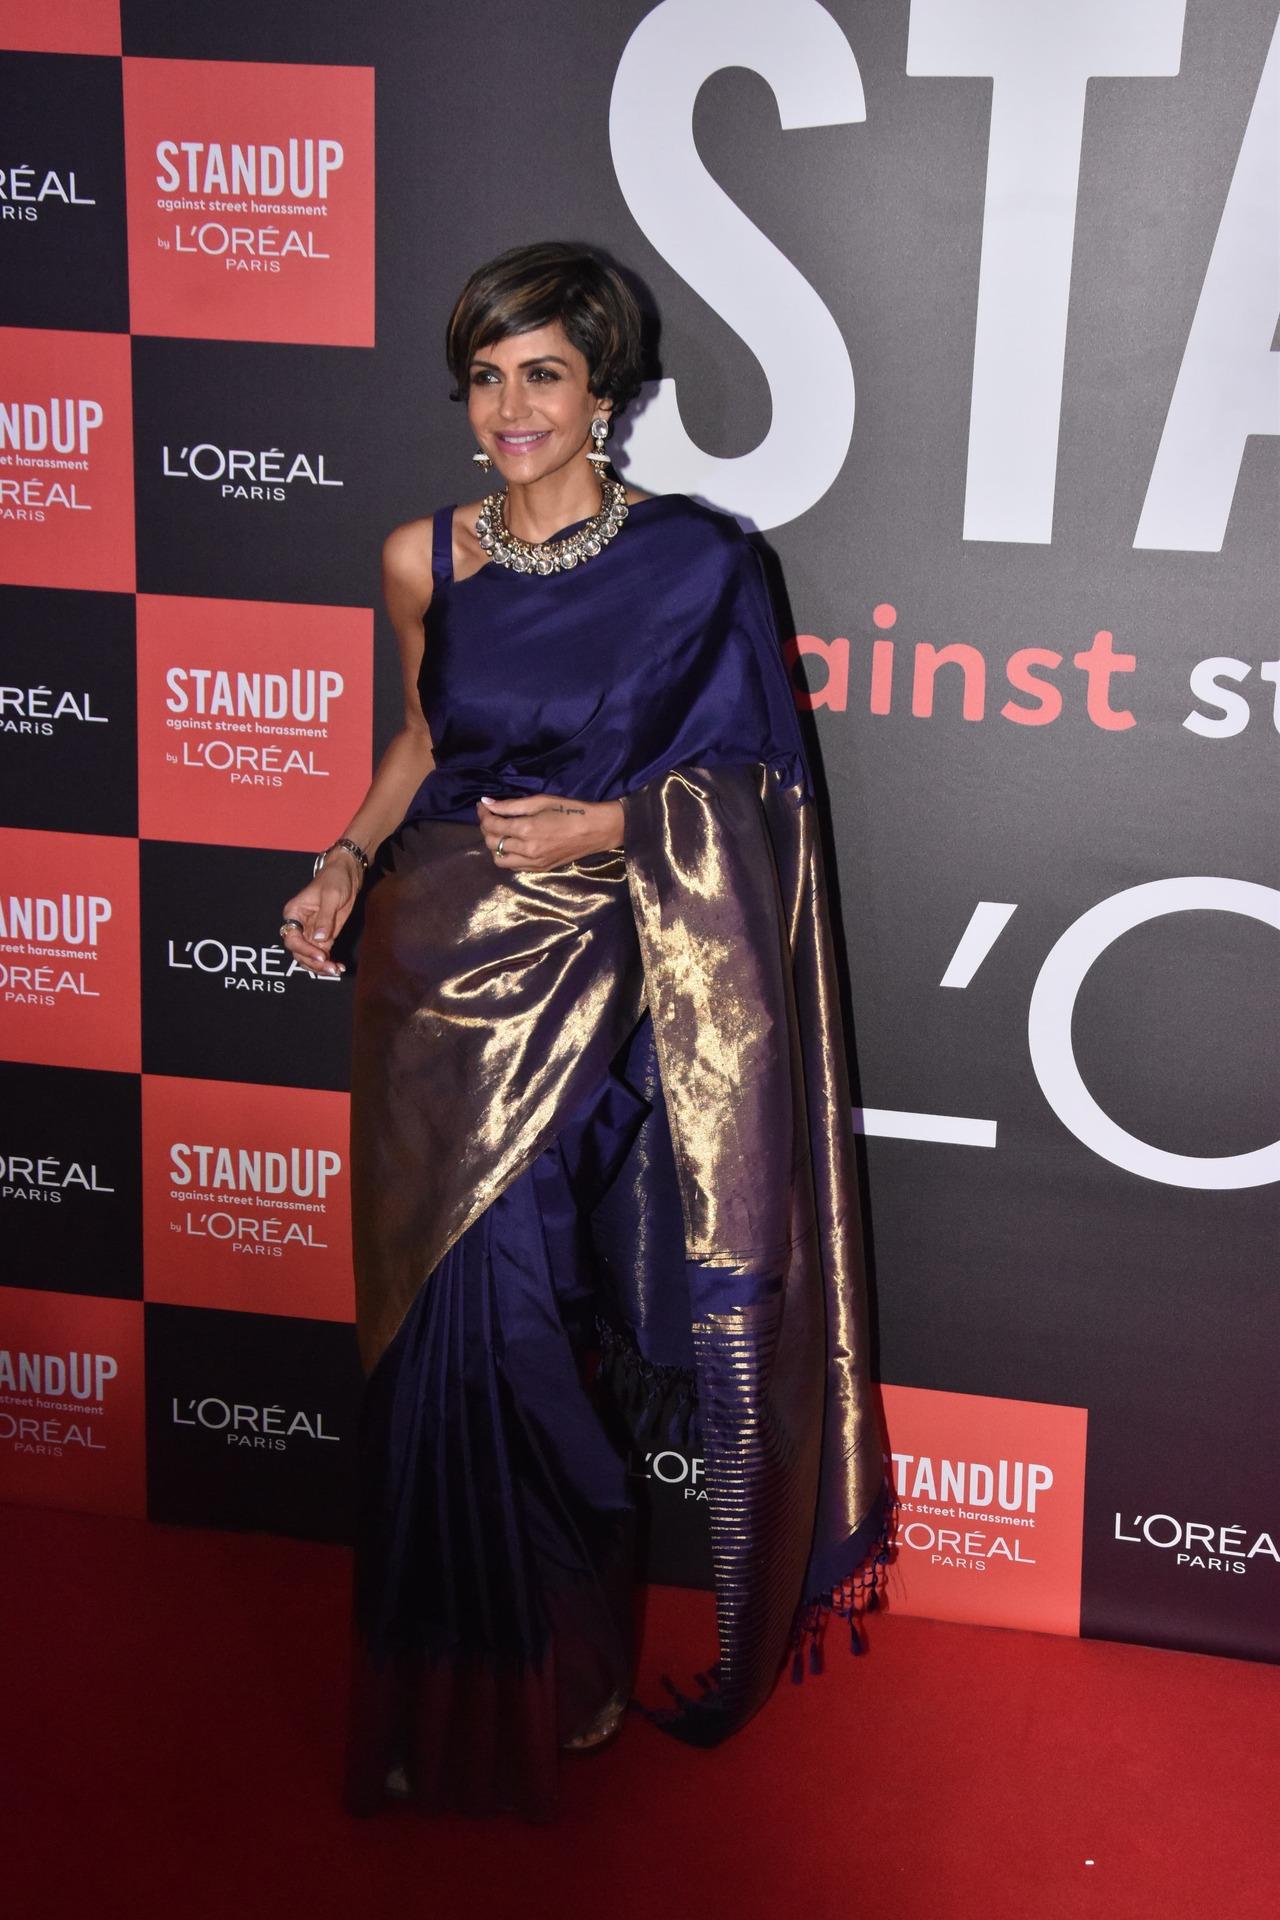 Mandira Bedi who was the host of the event truly stood out in her stunning silk saree